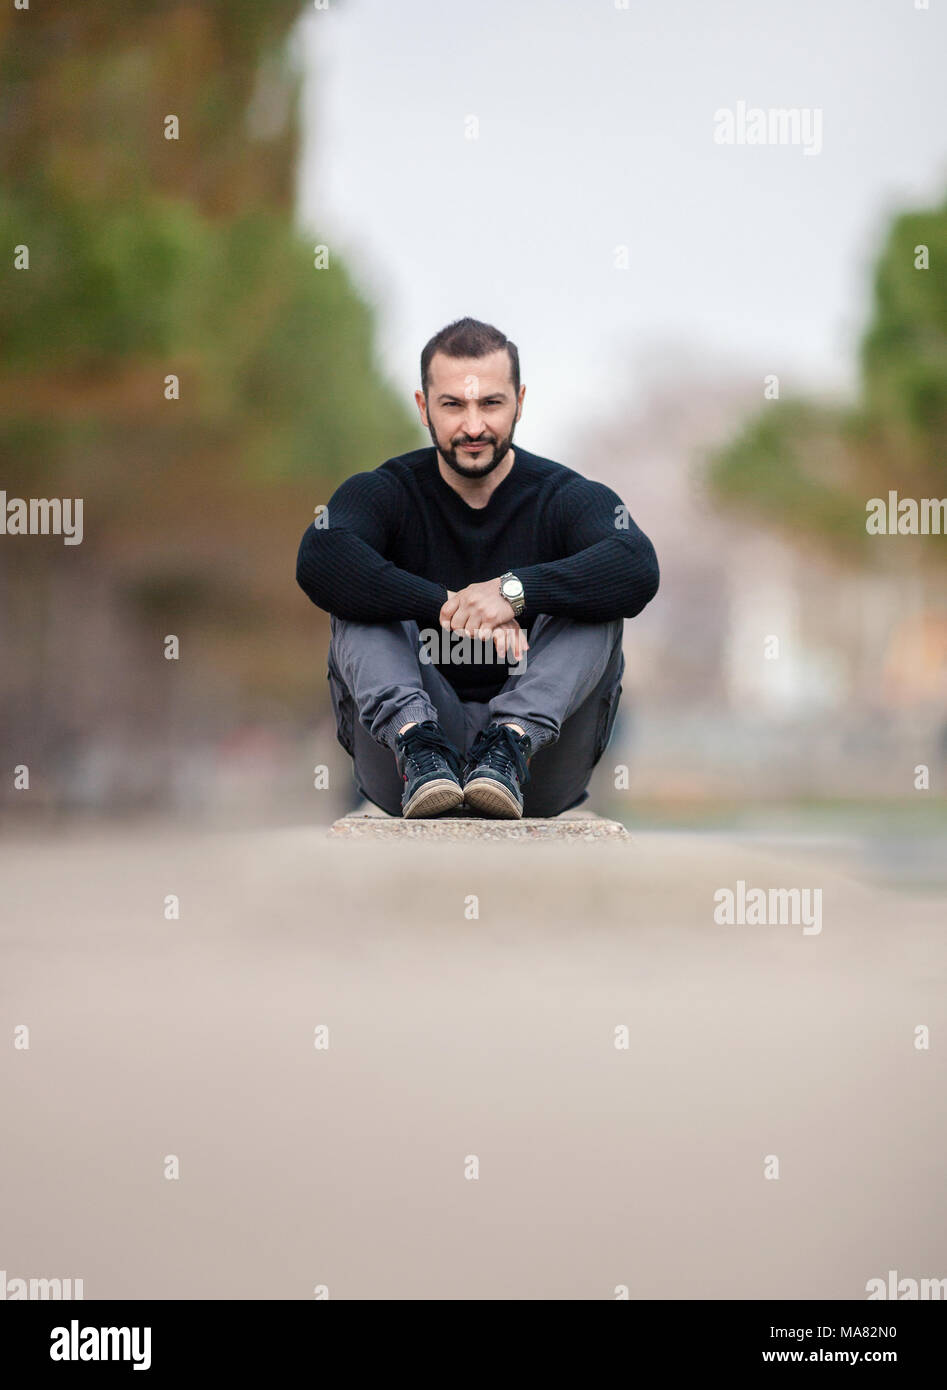 Successful Self Confident Man wearing casual clothes sitting on the ground at a park outdoors. Shot with extreme shallow depth of field using rare len Stock Photo